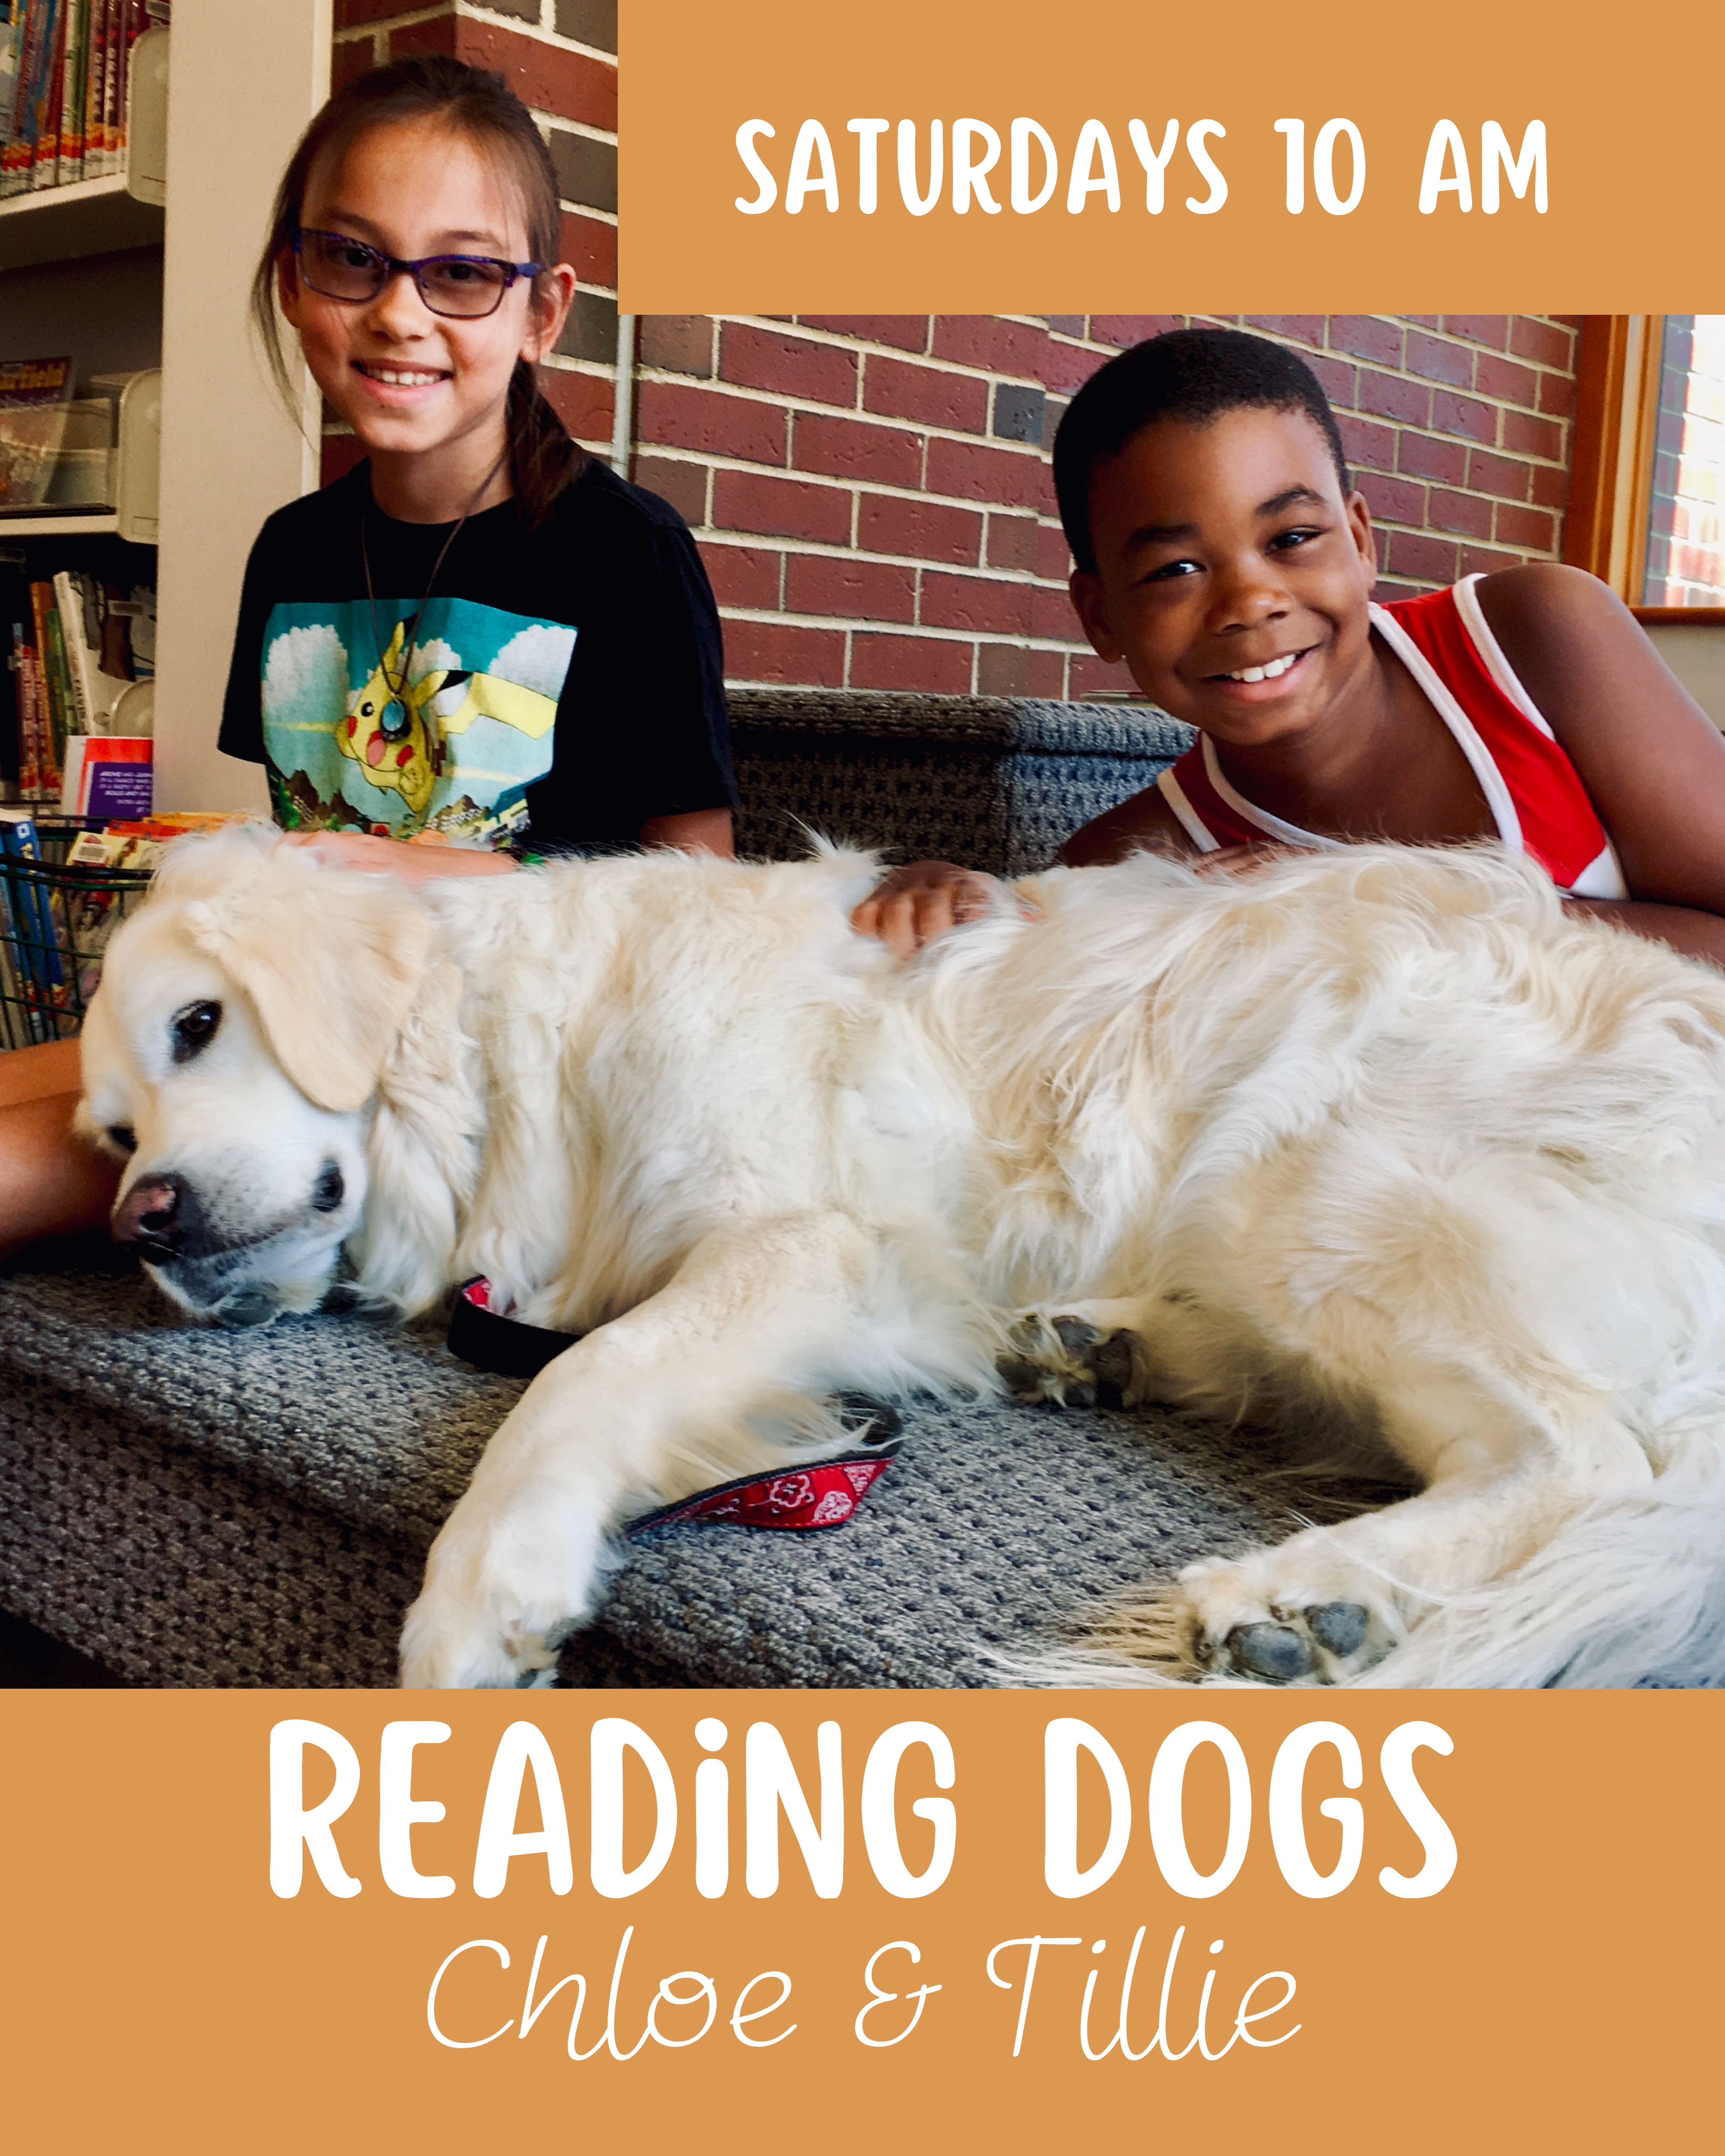 Smiling youth patrons in library reading area with relaxed dog